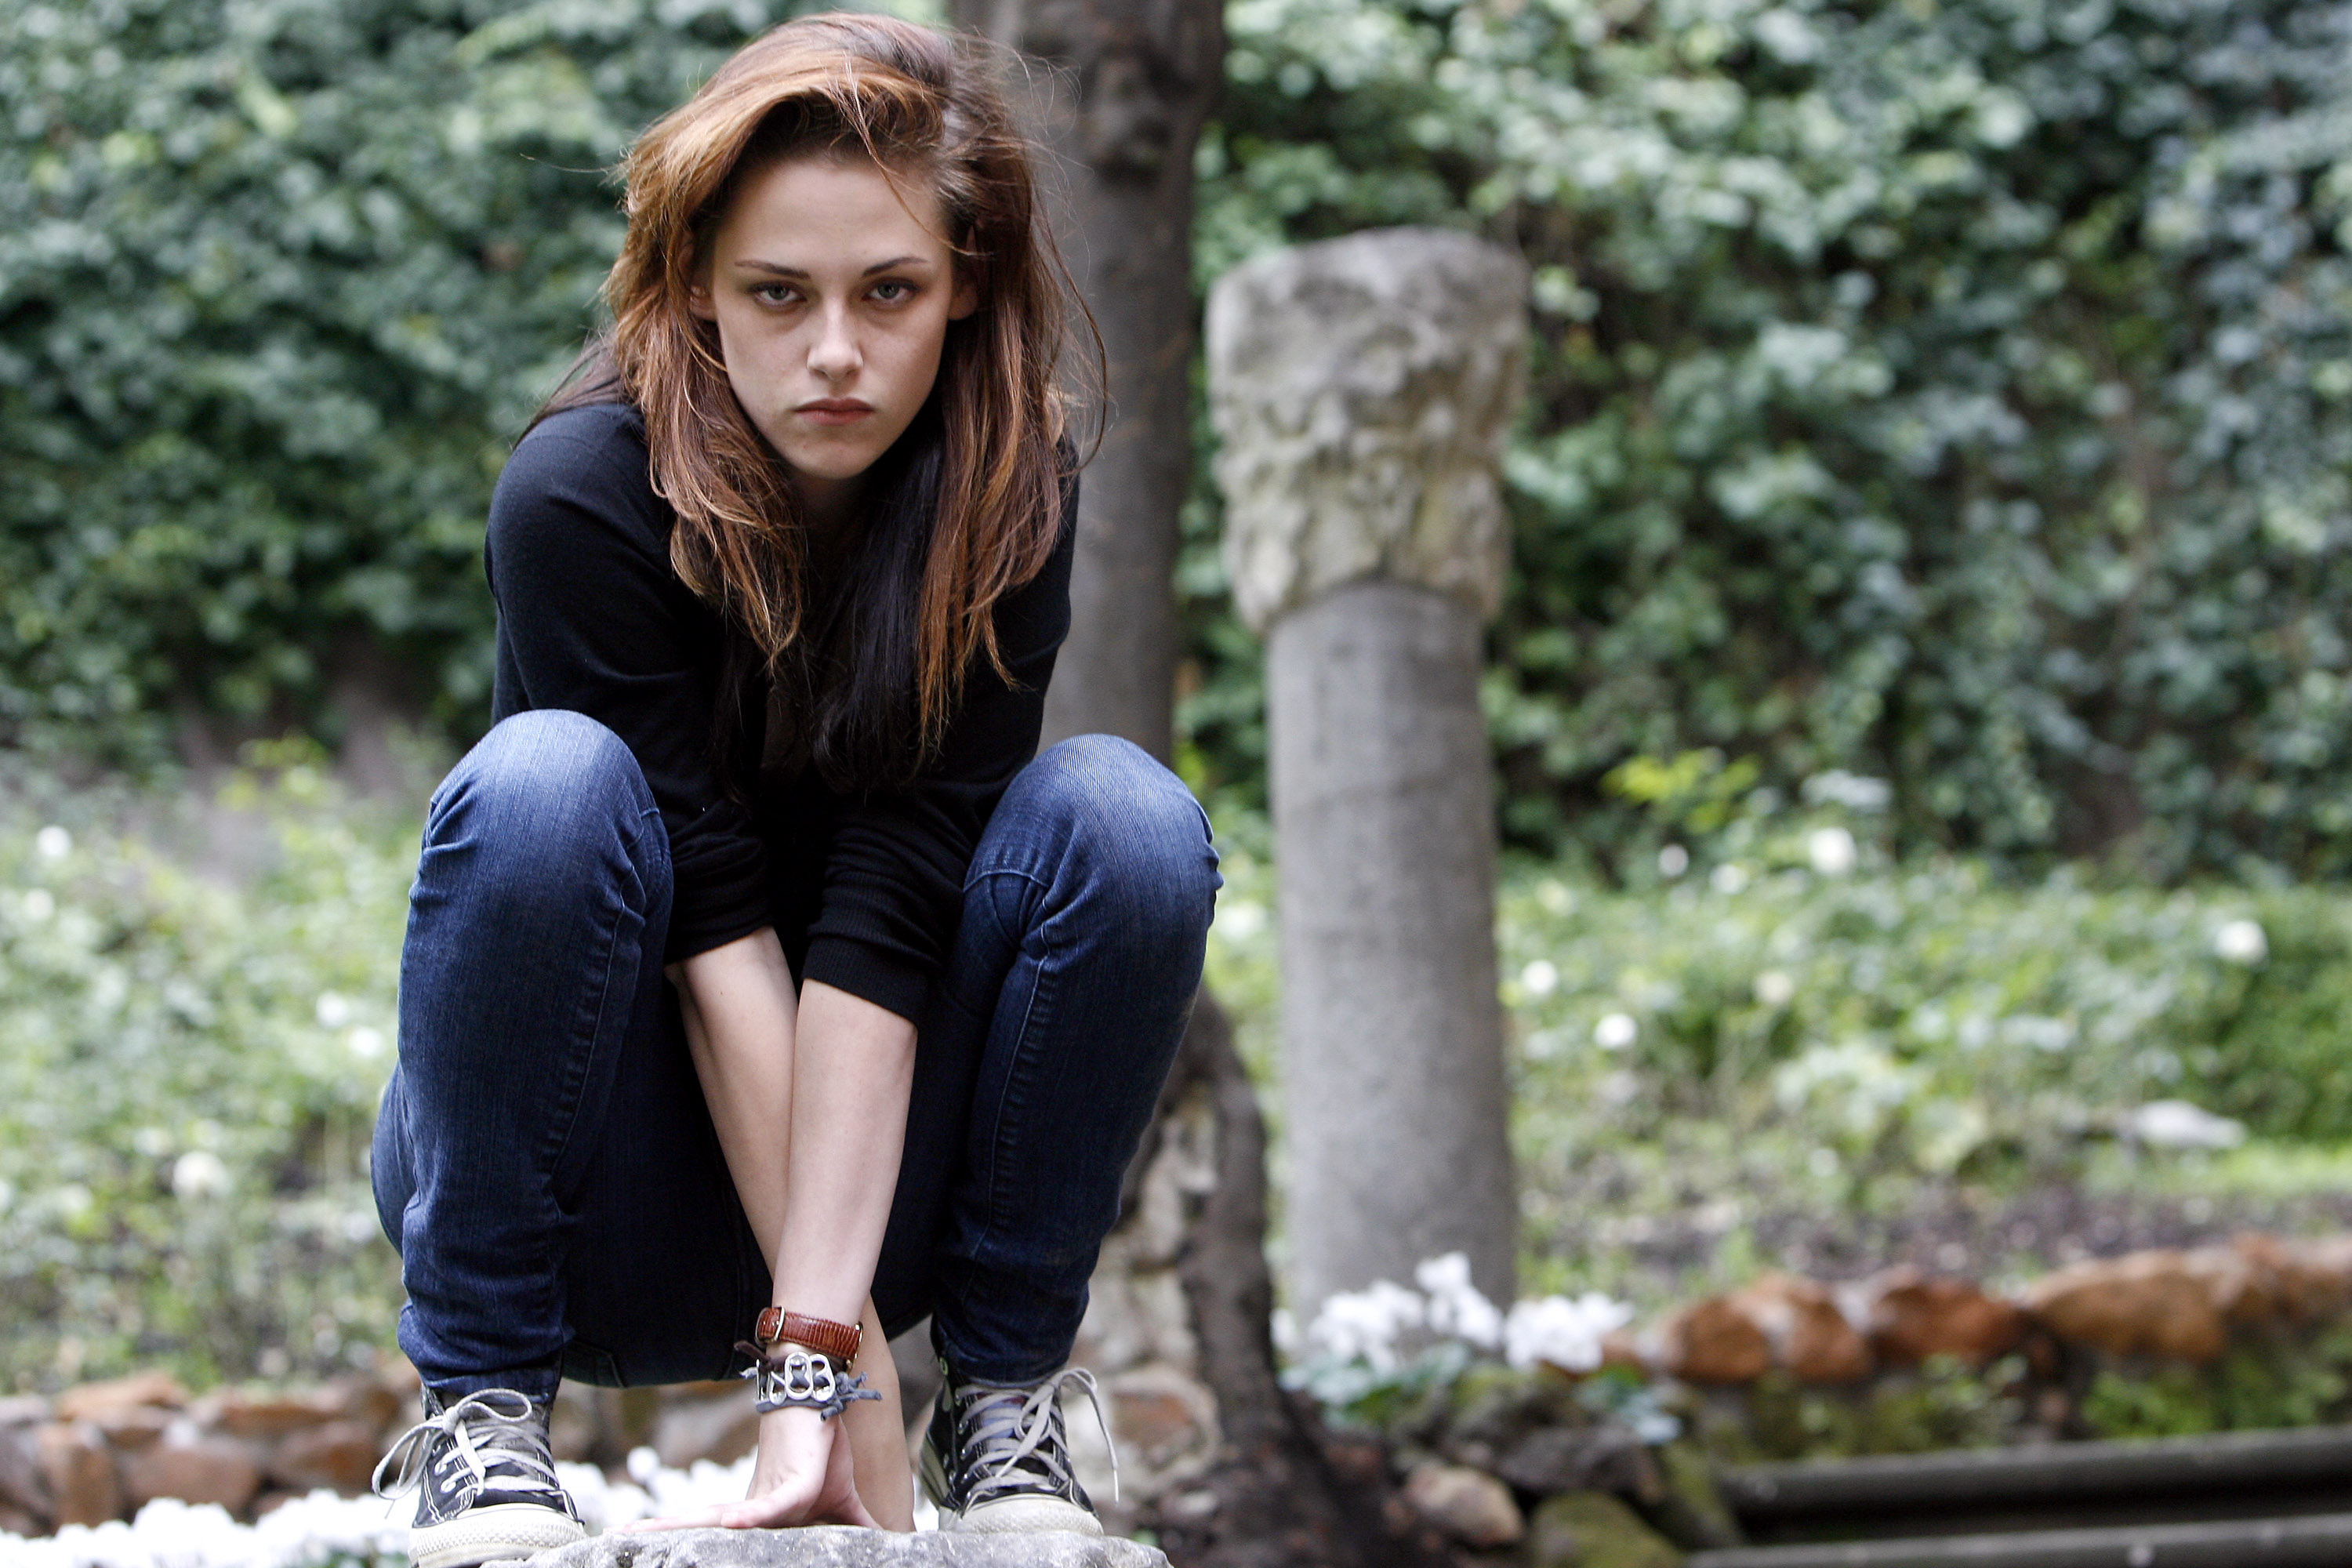 Twilight star Kristen Stewart poses for cast photos while crouching in blue jeans